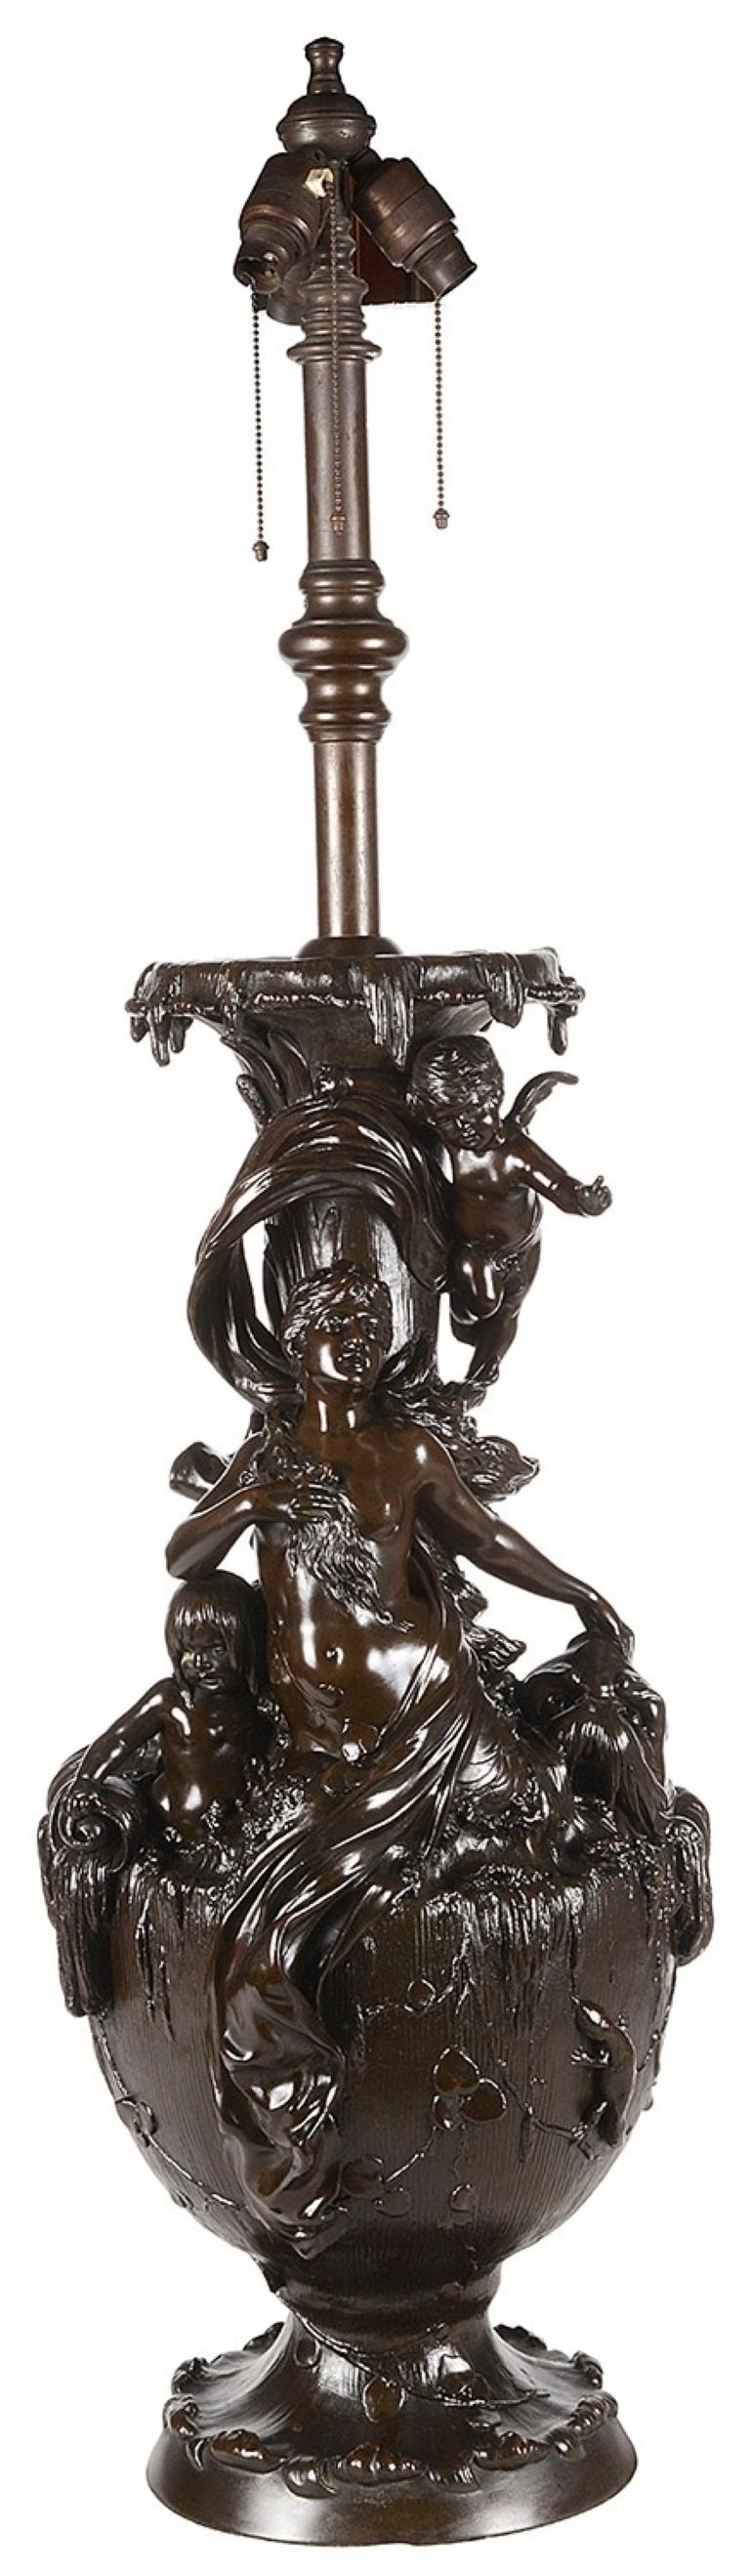 A wonderfully impressive 19th century bronzed Spelter vase depicting the Ancient Greek Sea Goddess Amphitrite with a Sea urchin and cherubs around her.